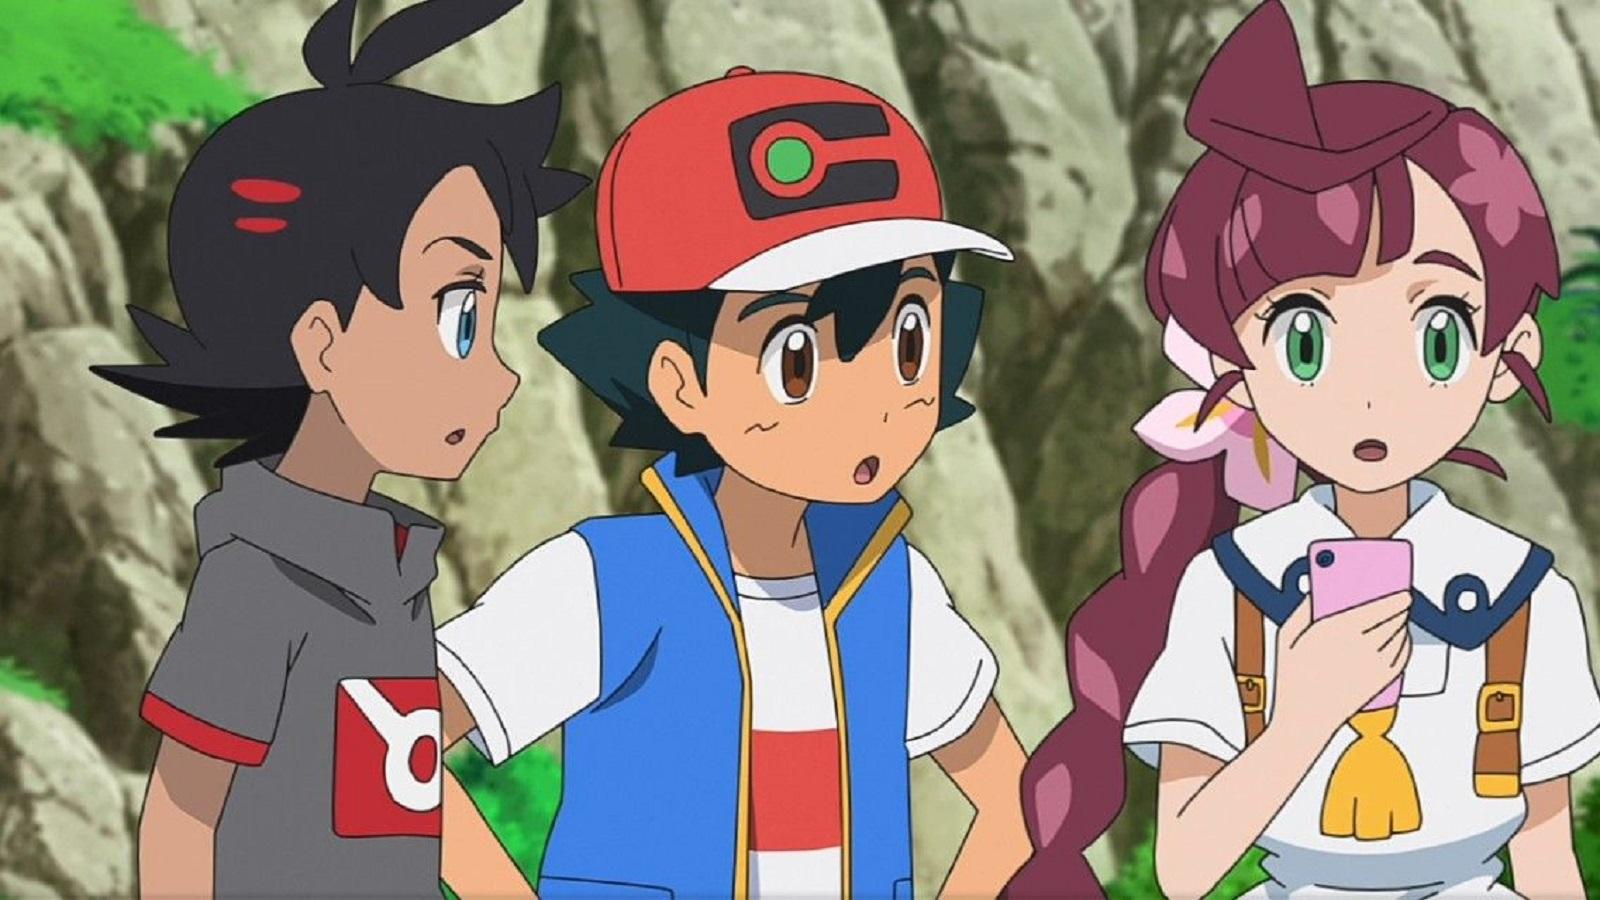 First look at Captain Pikachu's team members in Pokemon anime - Dexerto